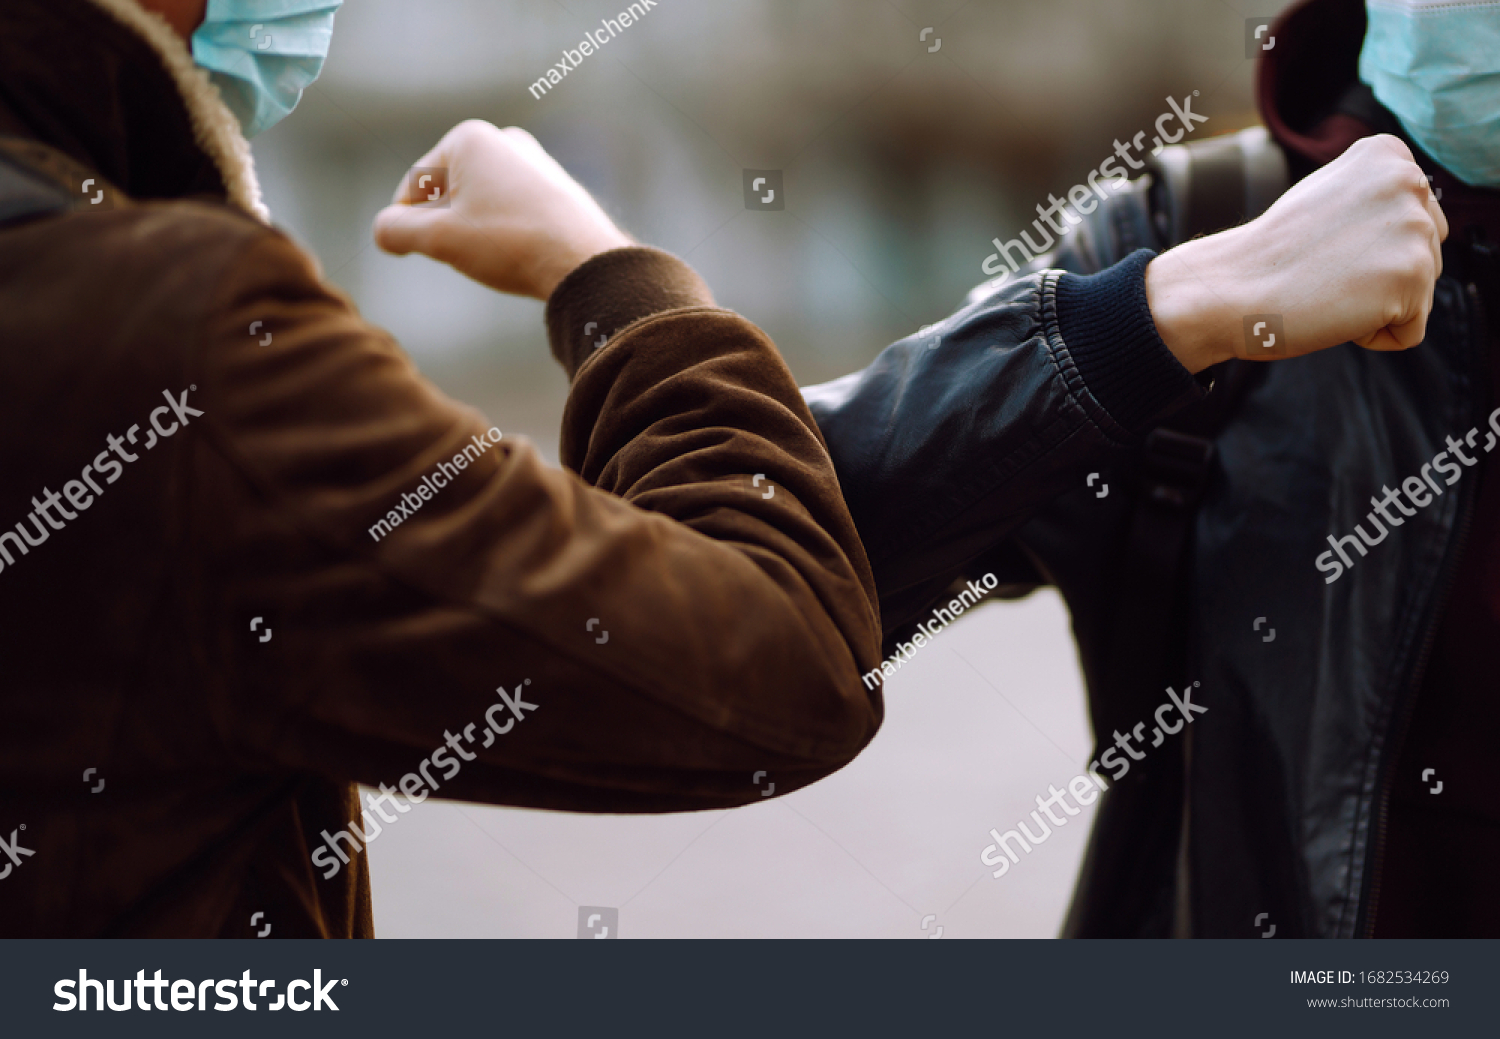 Friends in protective medical mask on his face greet their elbows in a quarantine city. Elbow bump is new greeting to avoid the spread of coronavirus. Don't shake hands. Stop handshakes. #1682534269